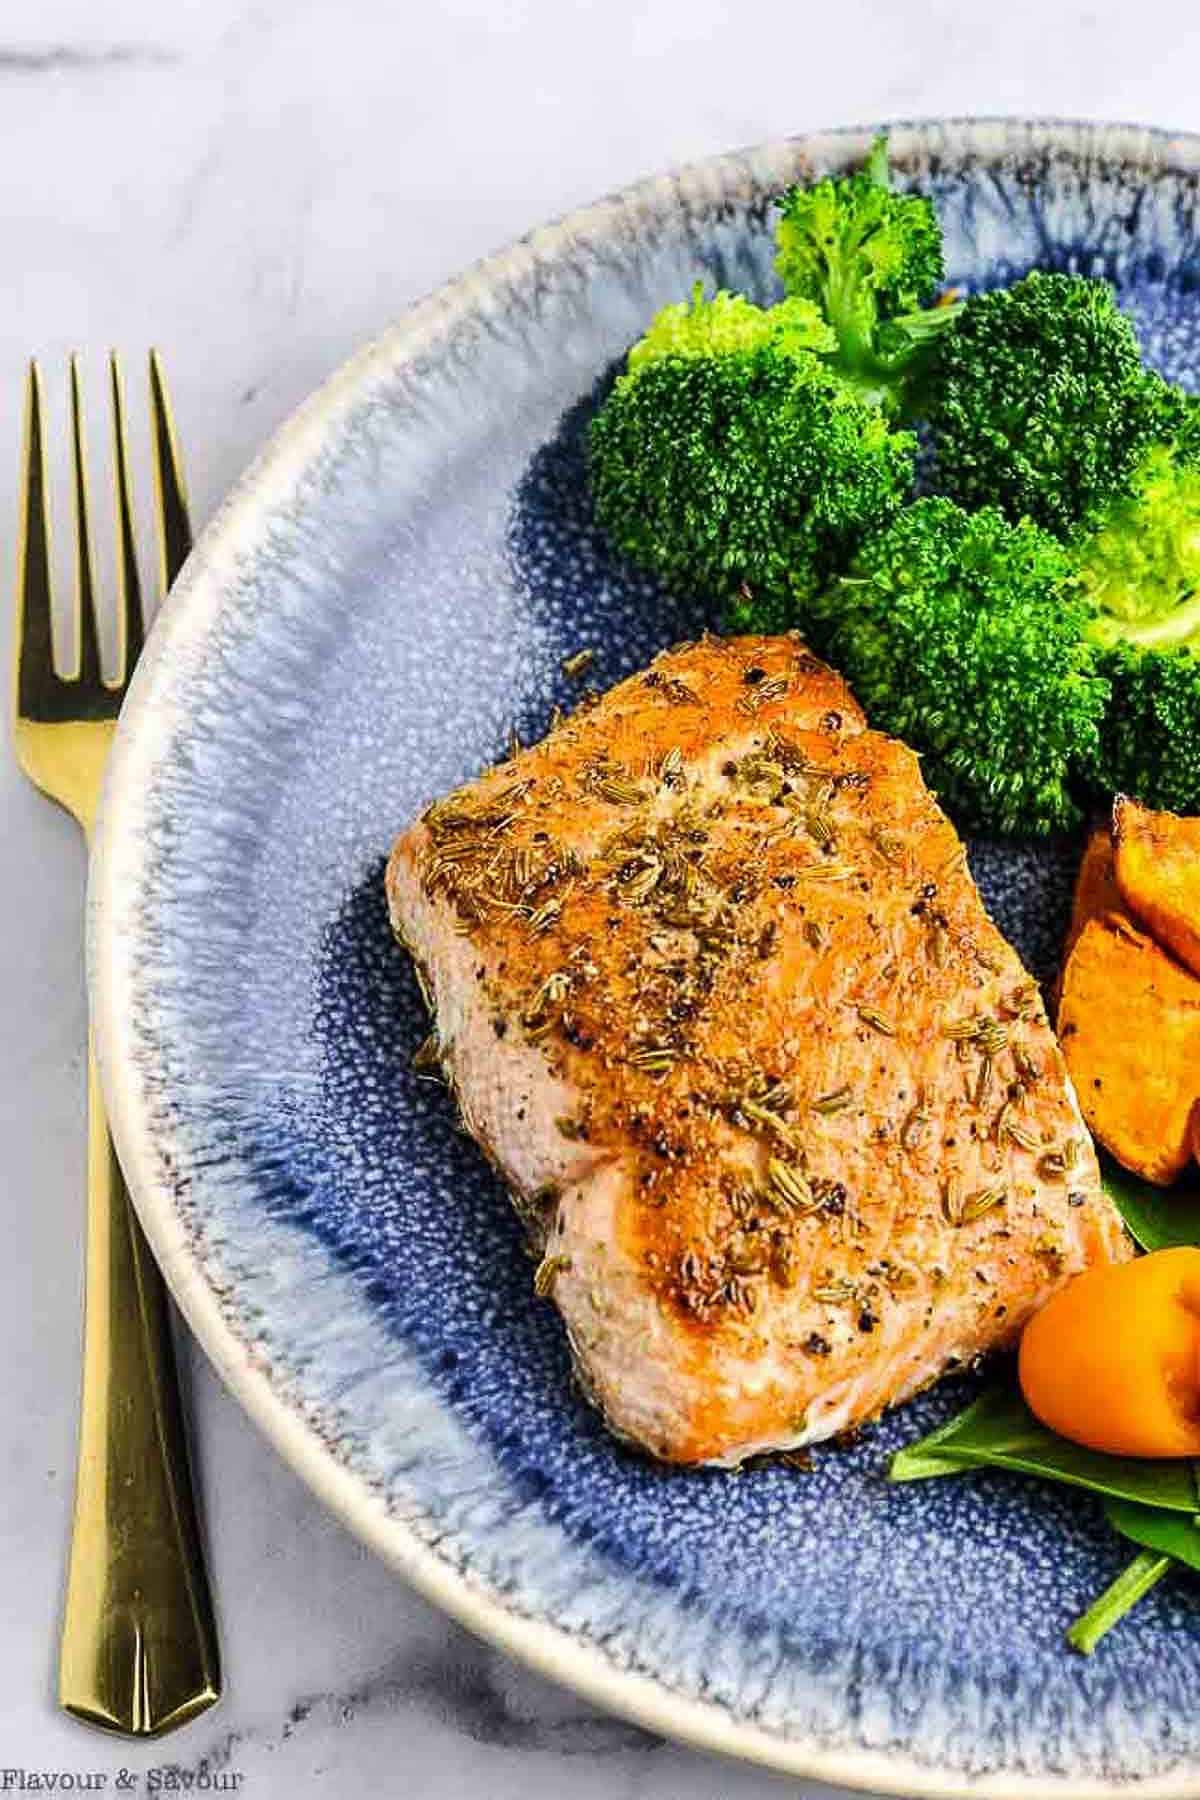 Fennel crusted salmon fillet on a blue plate with broccoli and roasted sweet potato cubes.